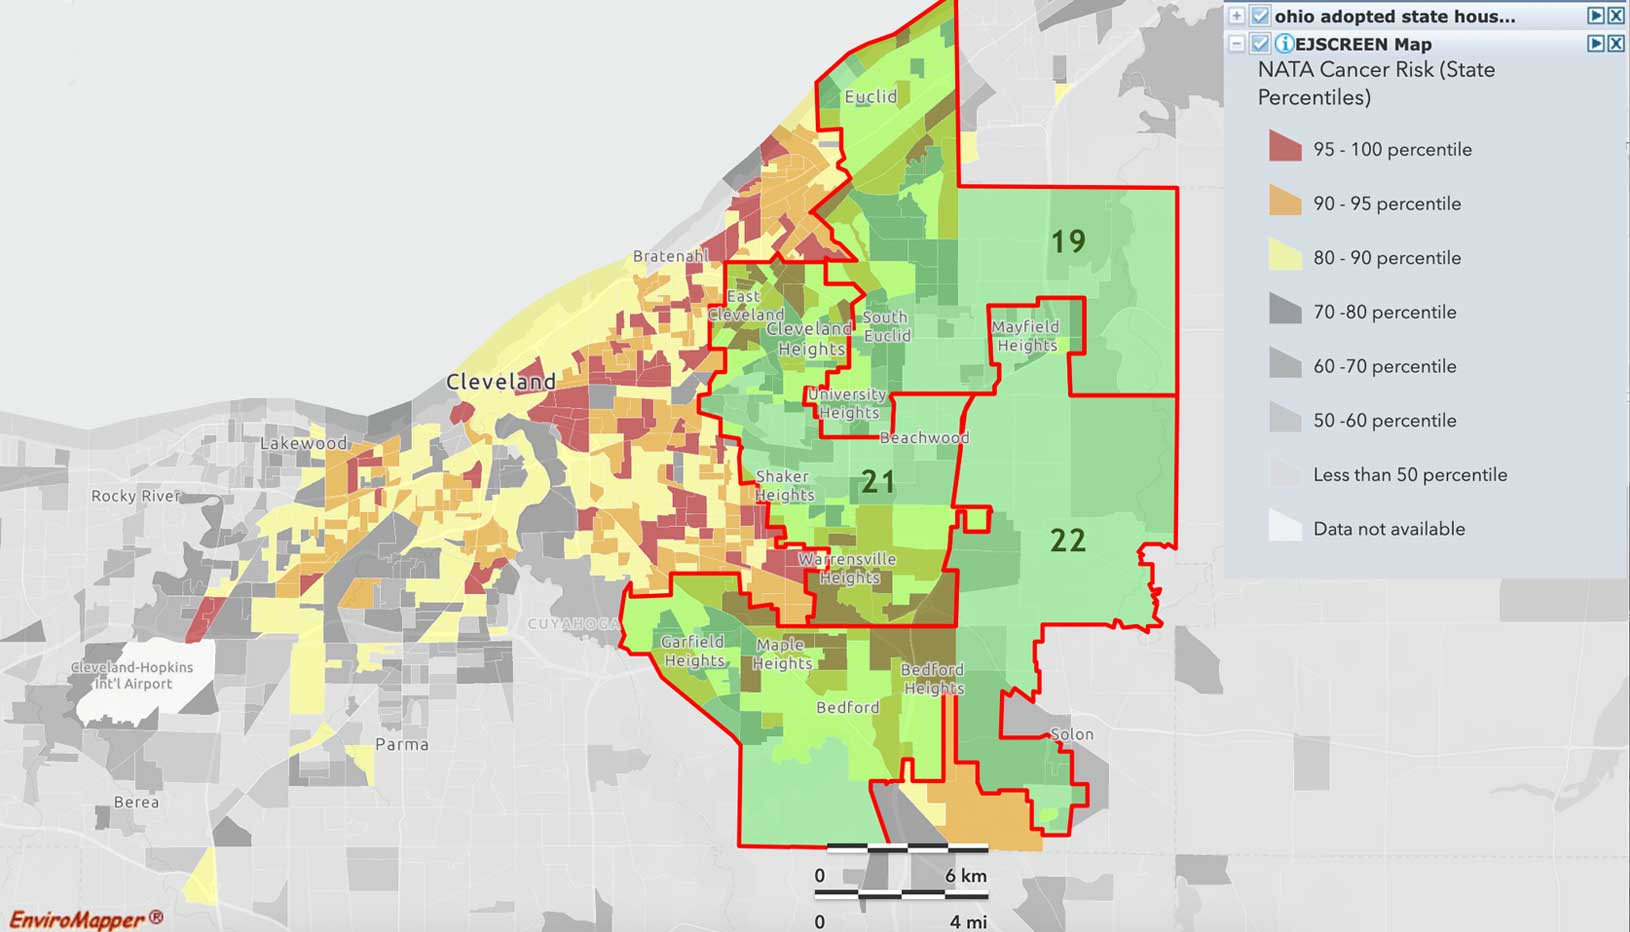 Map of the Cleveland area, showing areas sorted into colors by their cancer risk, with the new adopted Ohio legislative superimposed on top of them